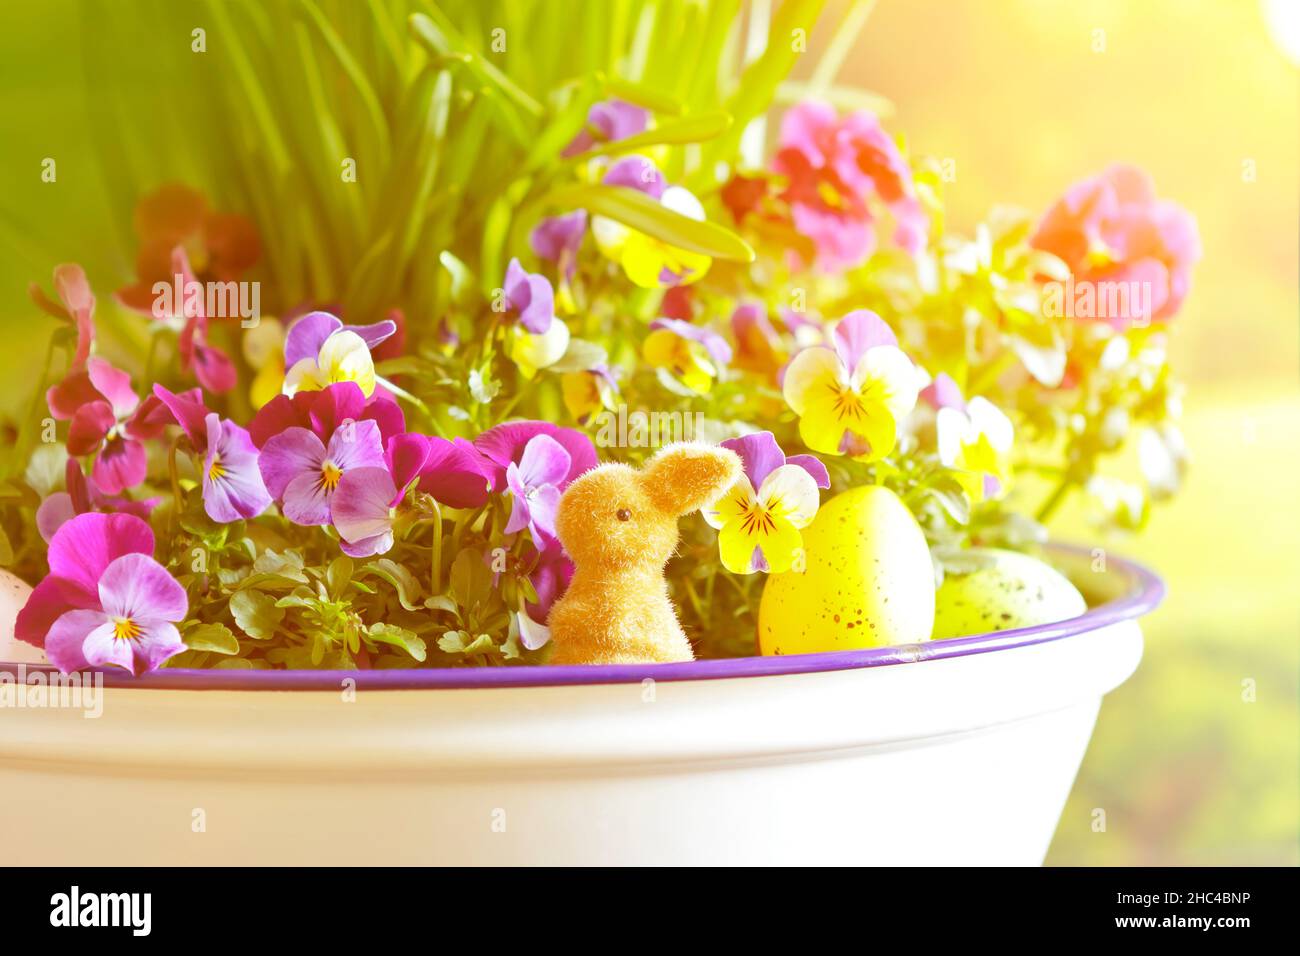 Closeup of a Happy Easter decoration with a little bunny, colored eggs and very colorful pansy flowers in full bloom. Stock Photo